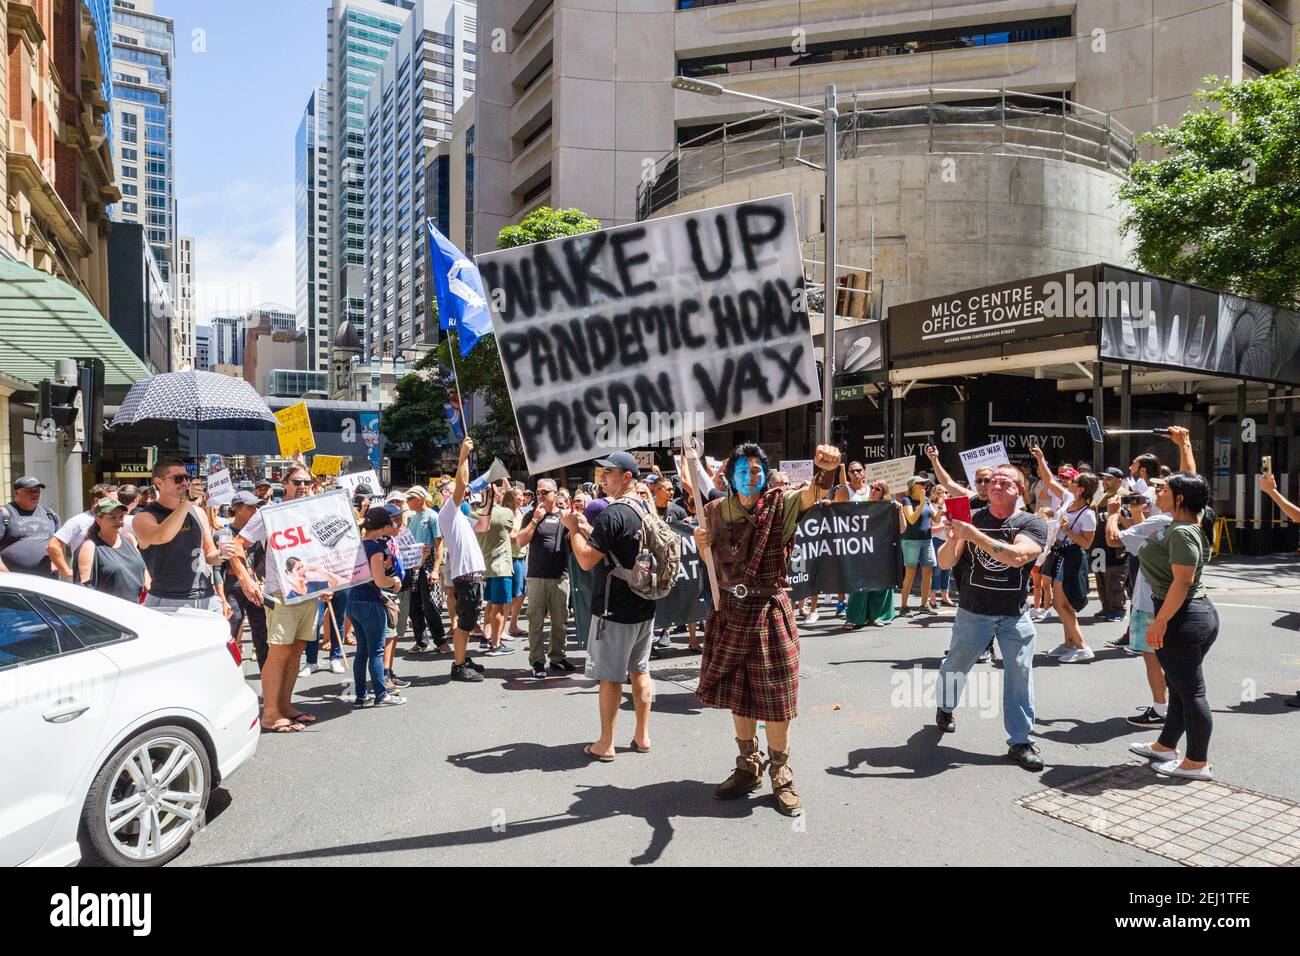 Sydney, Australia. 20 Feb 2021. The 'Millions March' anti-vaxx (anti compulsory COVID-19 coronavirus vaccinations) protest in Hyde Park and through the streets of Sydney's city centre. Event organizers anticipated a crowd of 1500 to 2000, but turnout on the day was far in excess of the expected crowd size and is likely to have numbered well over 3000. During the protest march, traffic was brought to a standstill at the intersection of King and Castlereagh Streets due to the large numbers of people involved. Pictured: traffic brought to a standstill by the street march protest at the intersecti Stock Photo